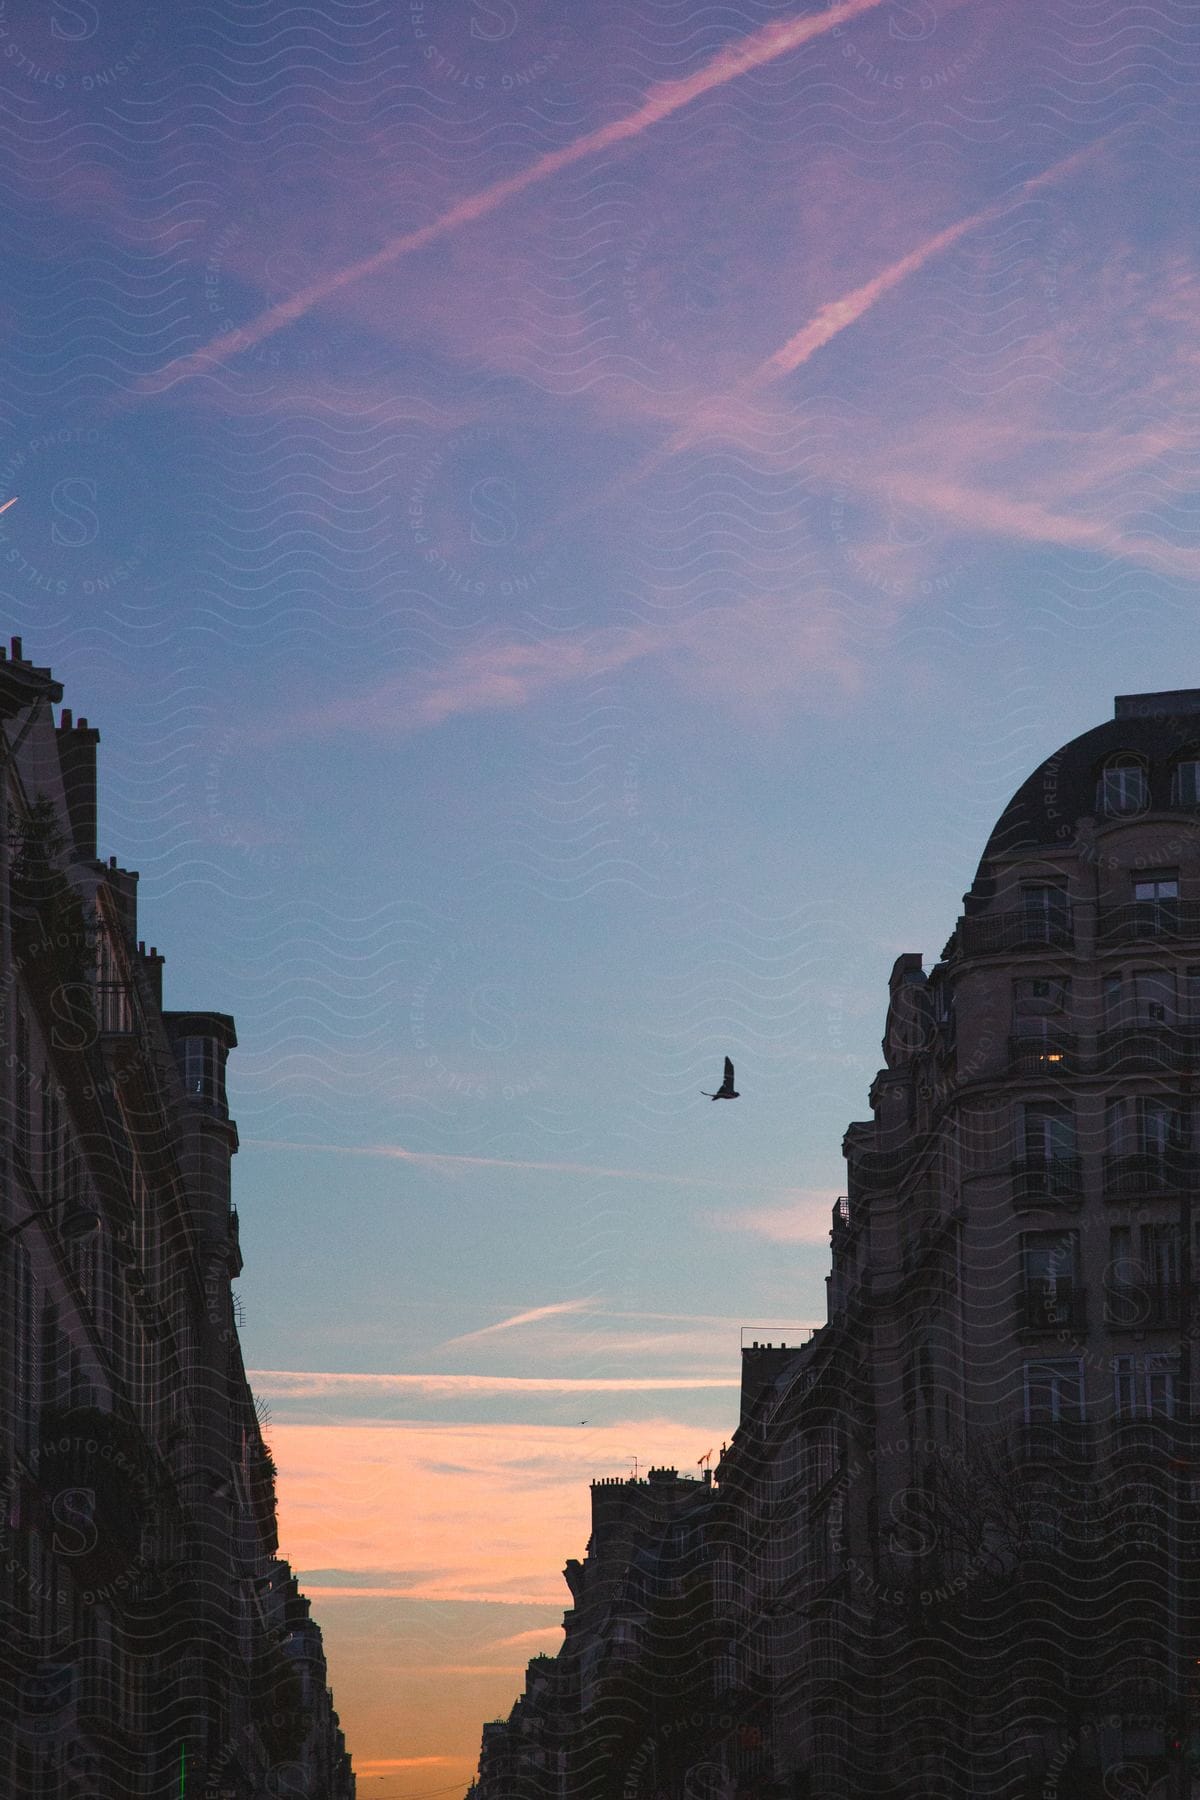 A bird is flying between buildings against a sunset sky with blue and orange hues